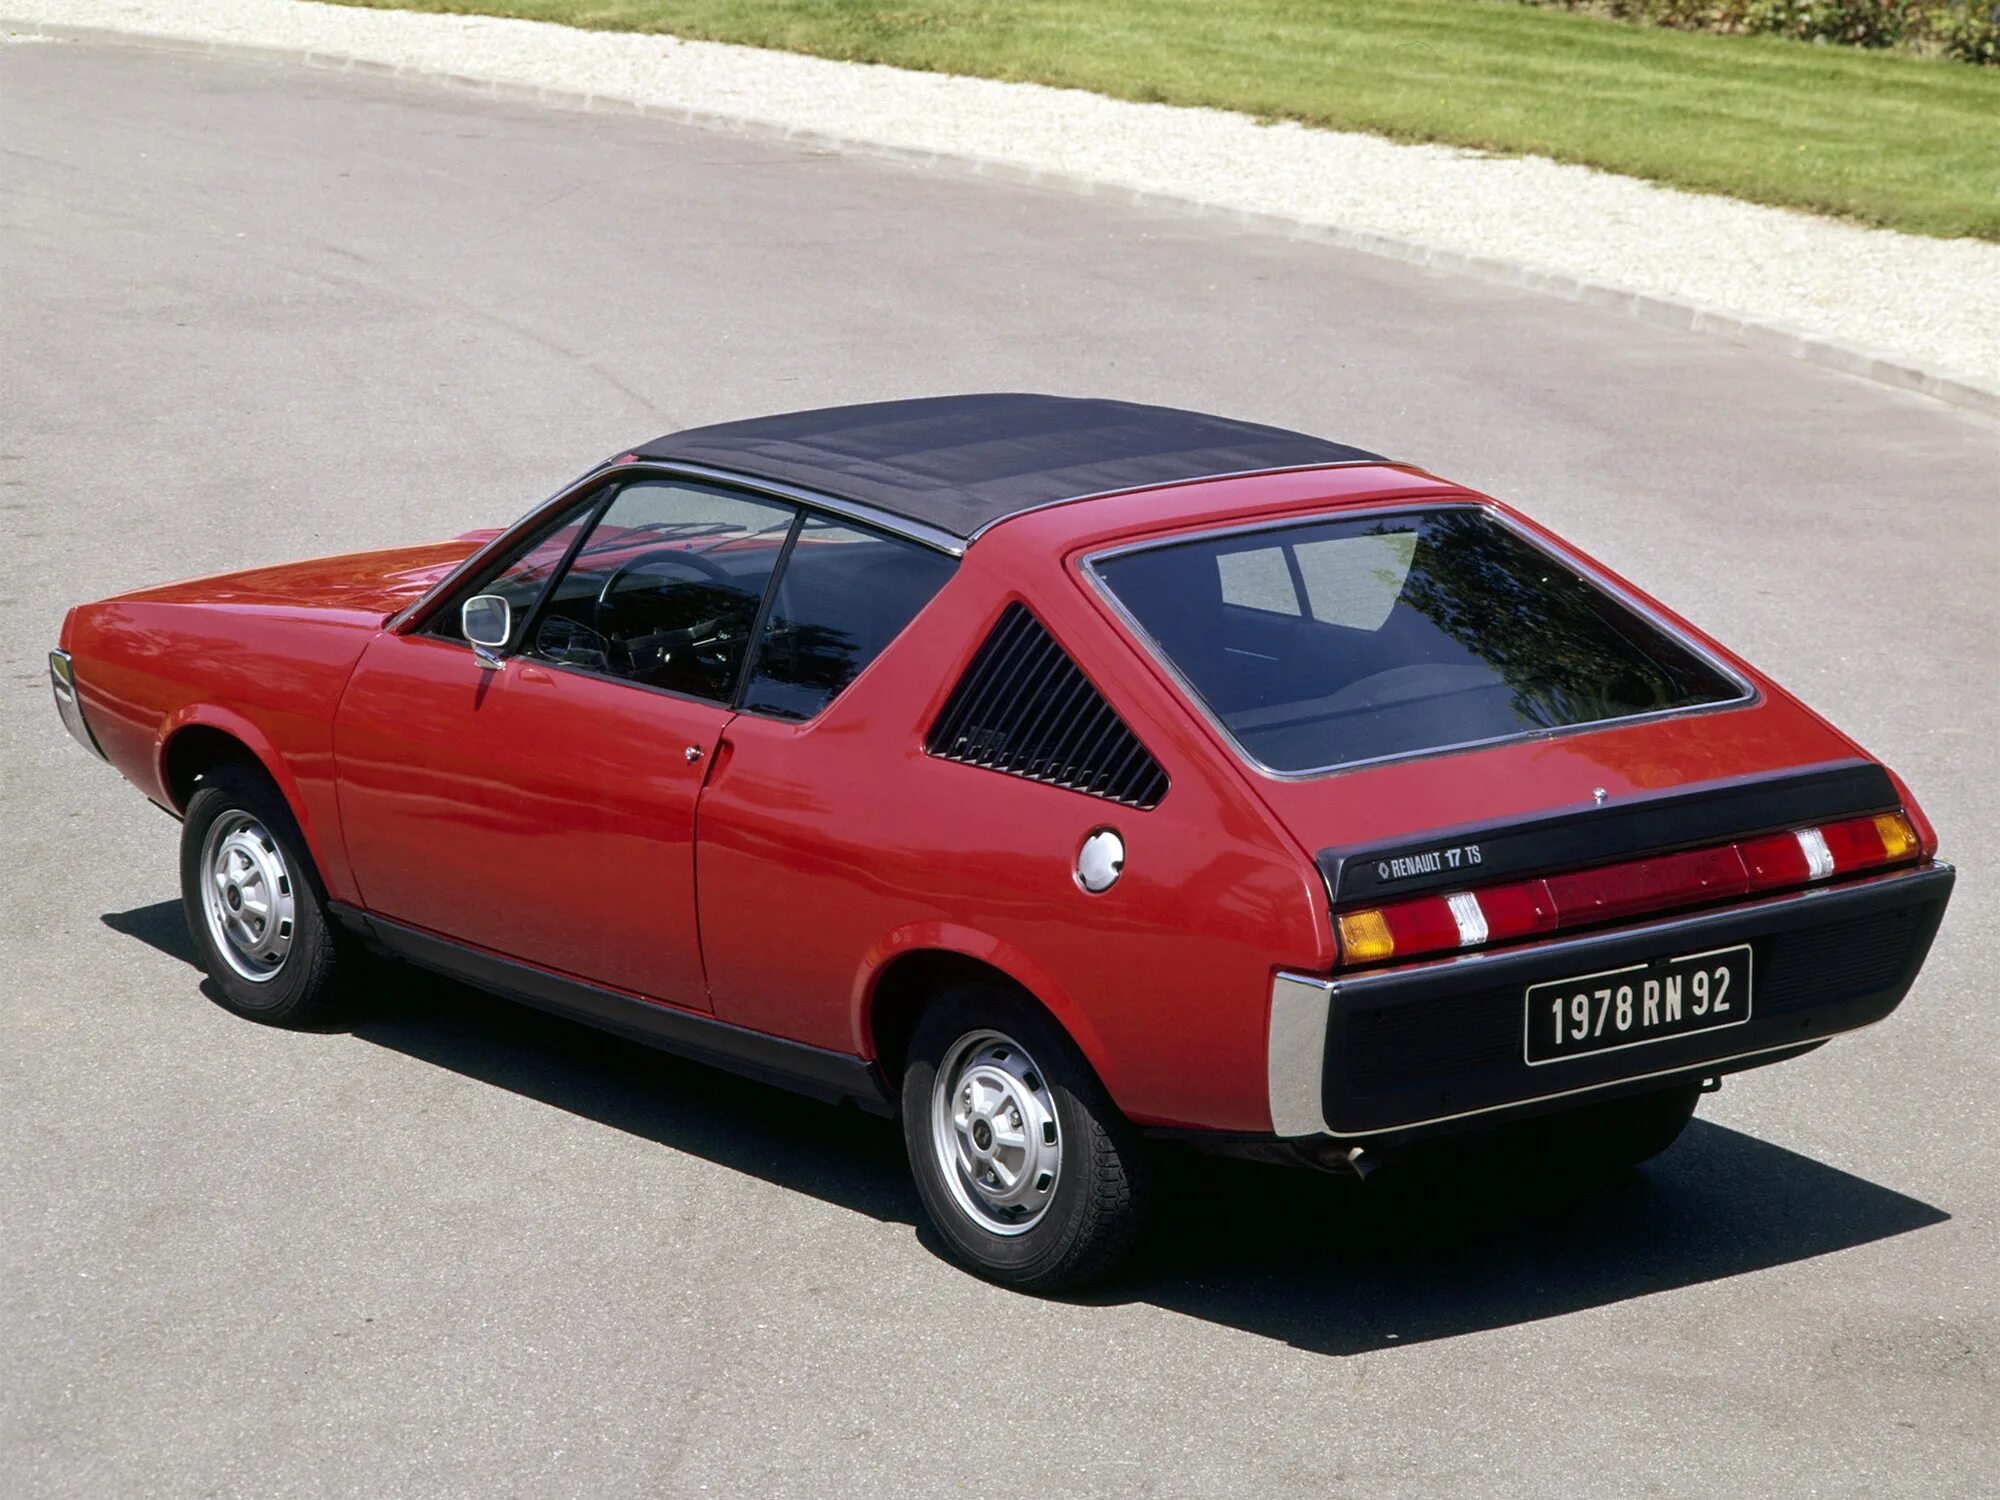 Renault старые. Рено 17 1 поколение. Renault хэтчбек 80. Рено хэтчбек 1980. Renault 1978 Coupe.